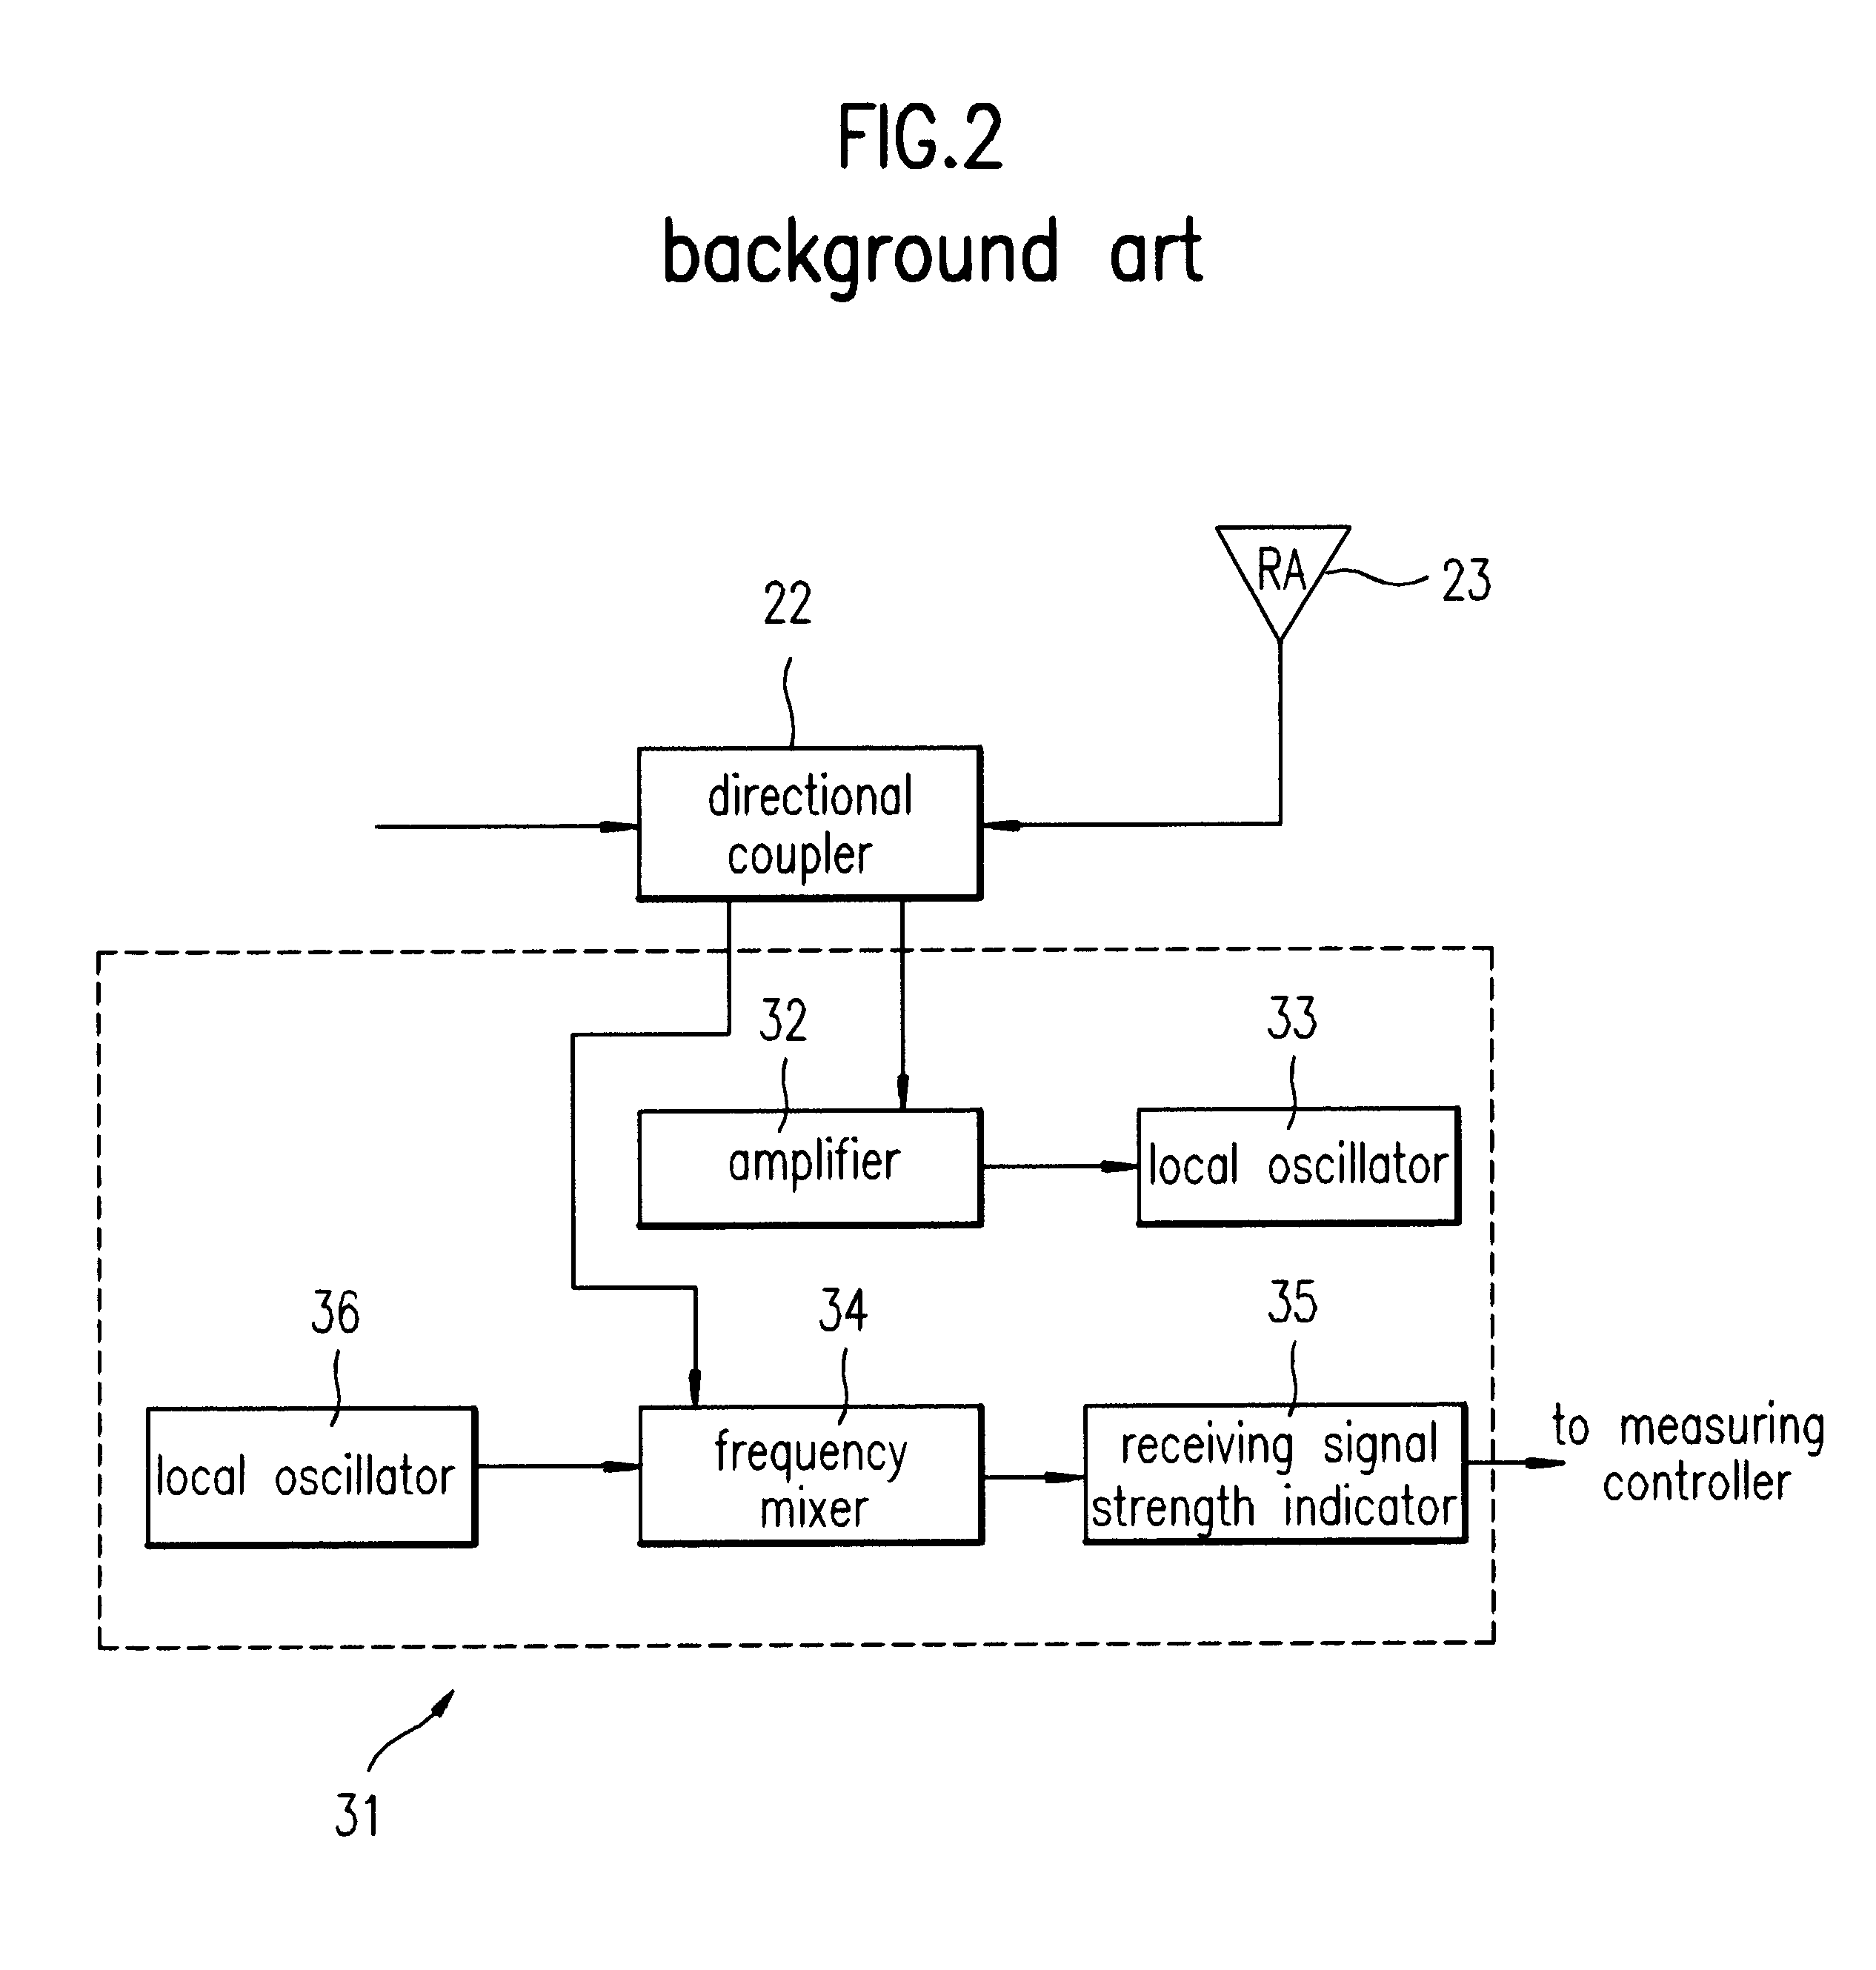 Transmitting and receiving antenna voltage standing wave ratios measuring circuit of base station in mobile communication system